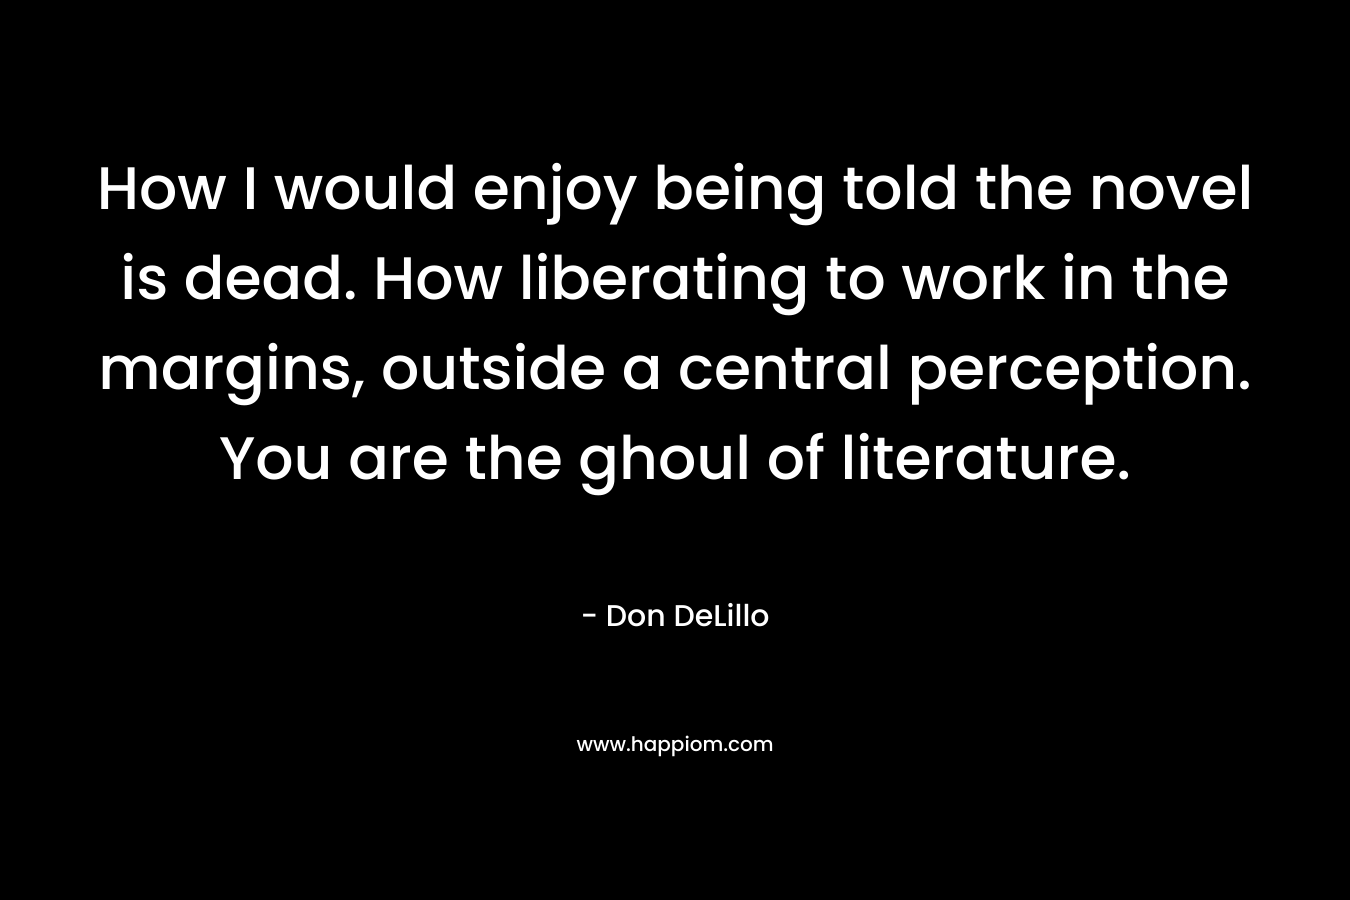 How I would enjoy being told the novel is dead. How liberating to work in the margins, outside a central perception. You are the ghoul of literature.